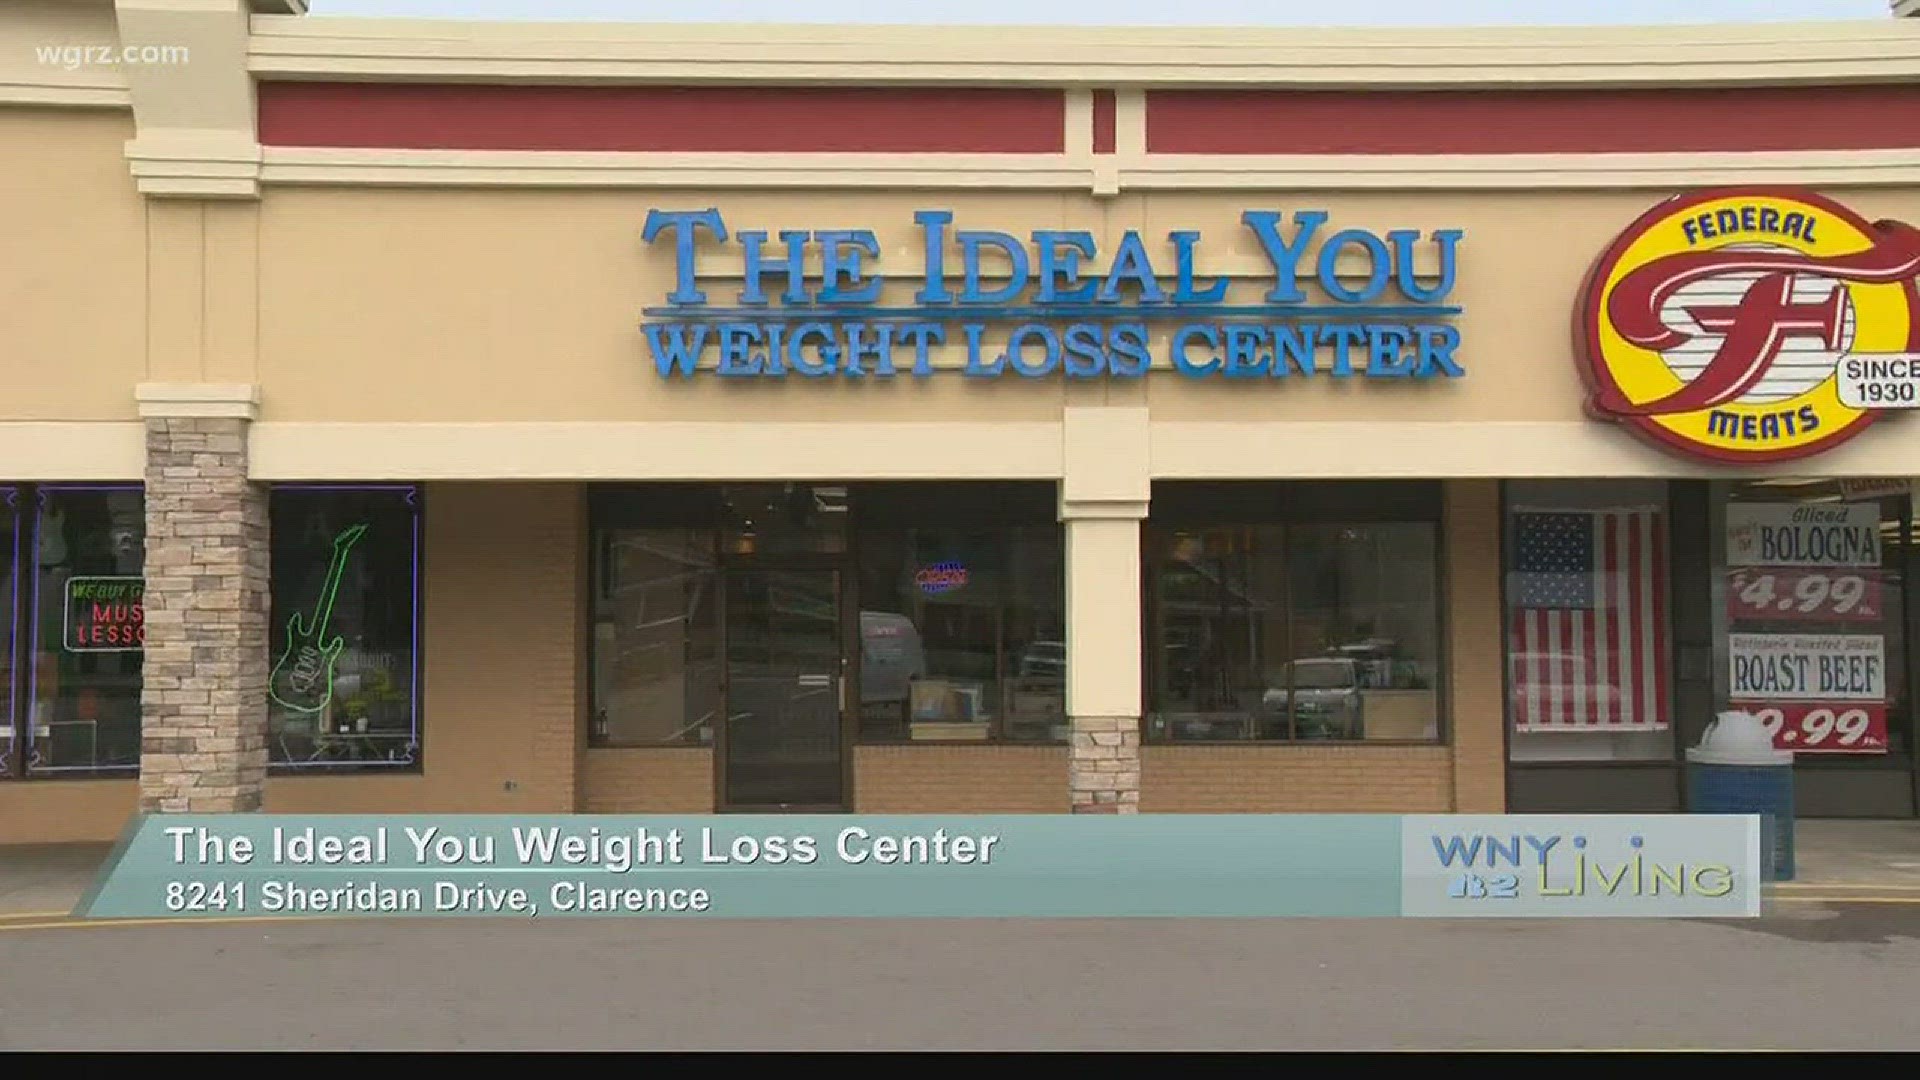 WNY Living - February 24 - The Ideal You Weight Loss Center